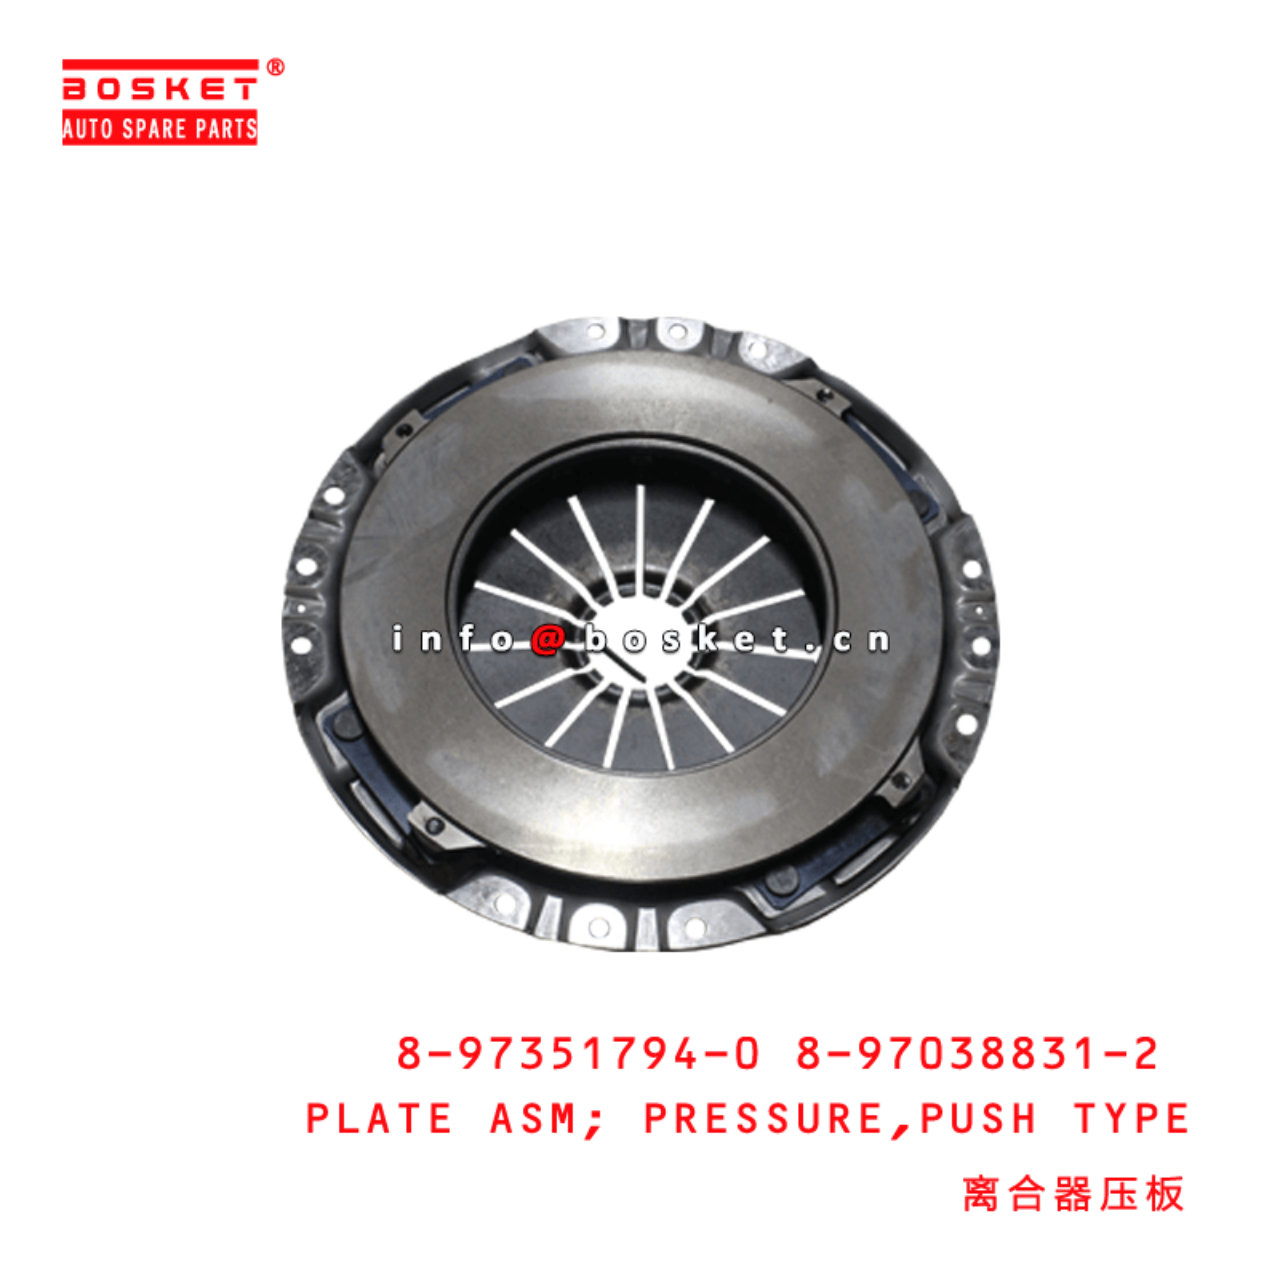 8-97351794-0 8-97038831-2 Push Type Pressure Plate Assembly 8973517940 8970388312 Suitable for ISUZU